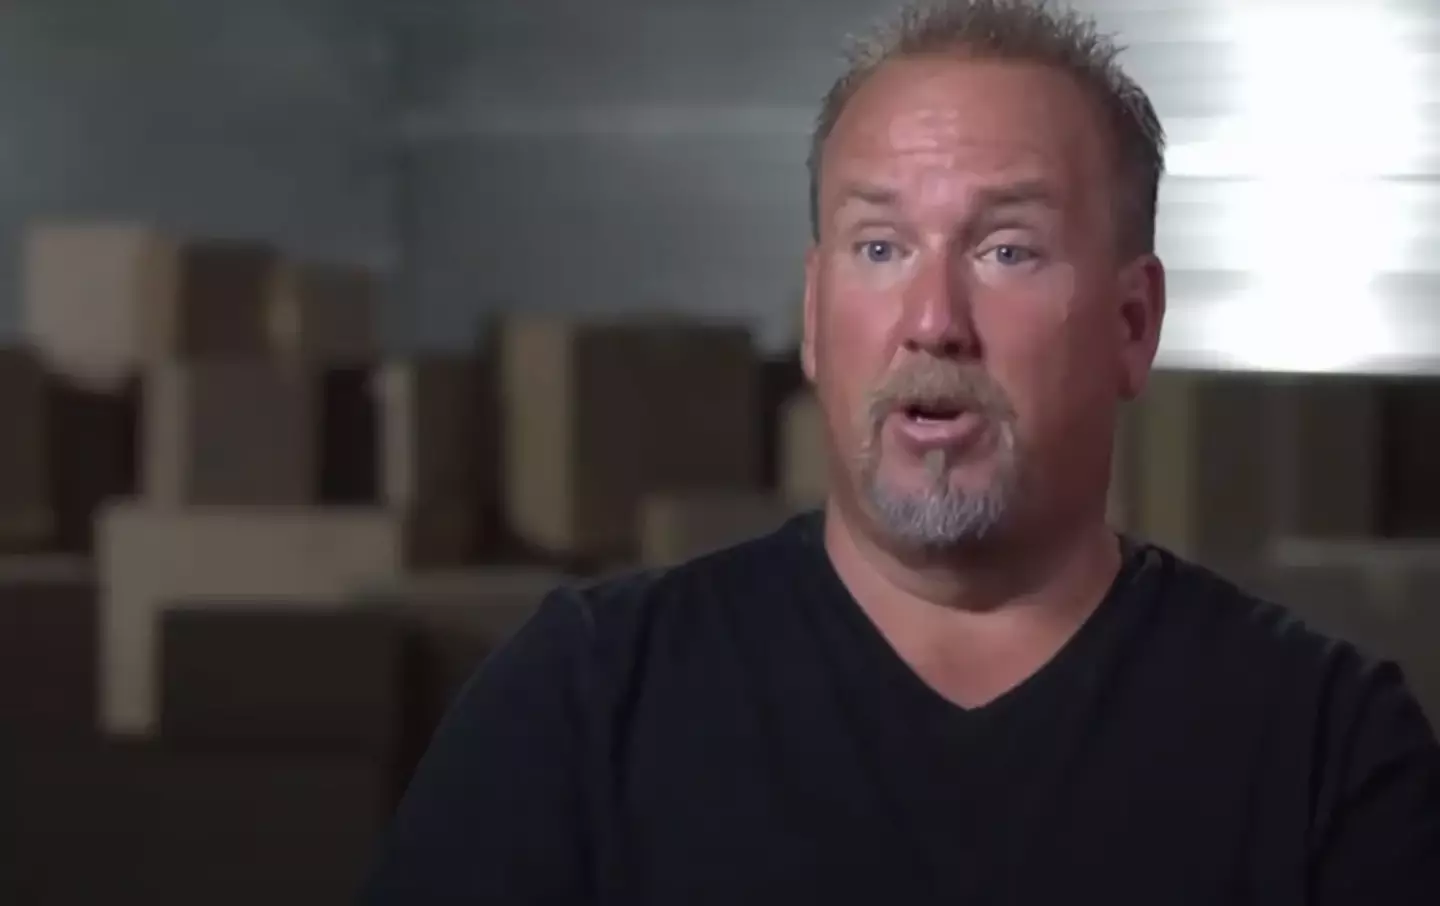 Storage Wars’ Darrell Sheets was left reeling after finding out how much the locker was worth.